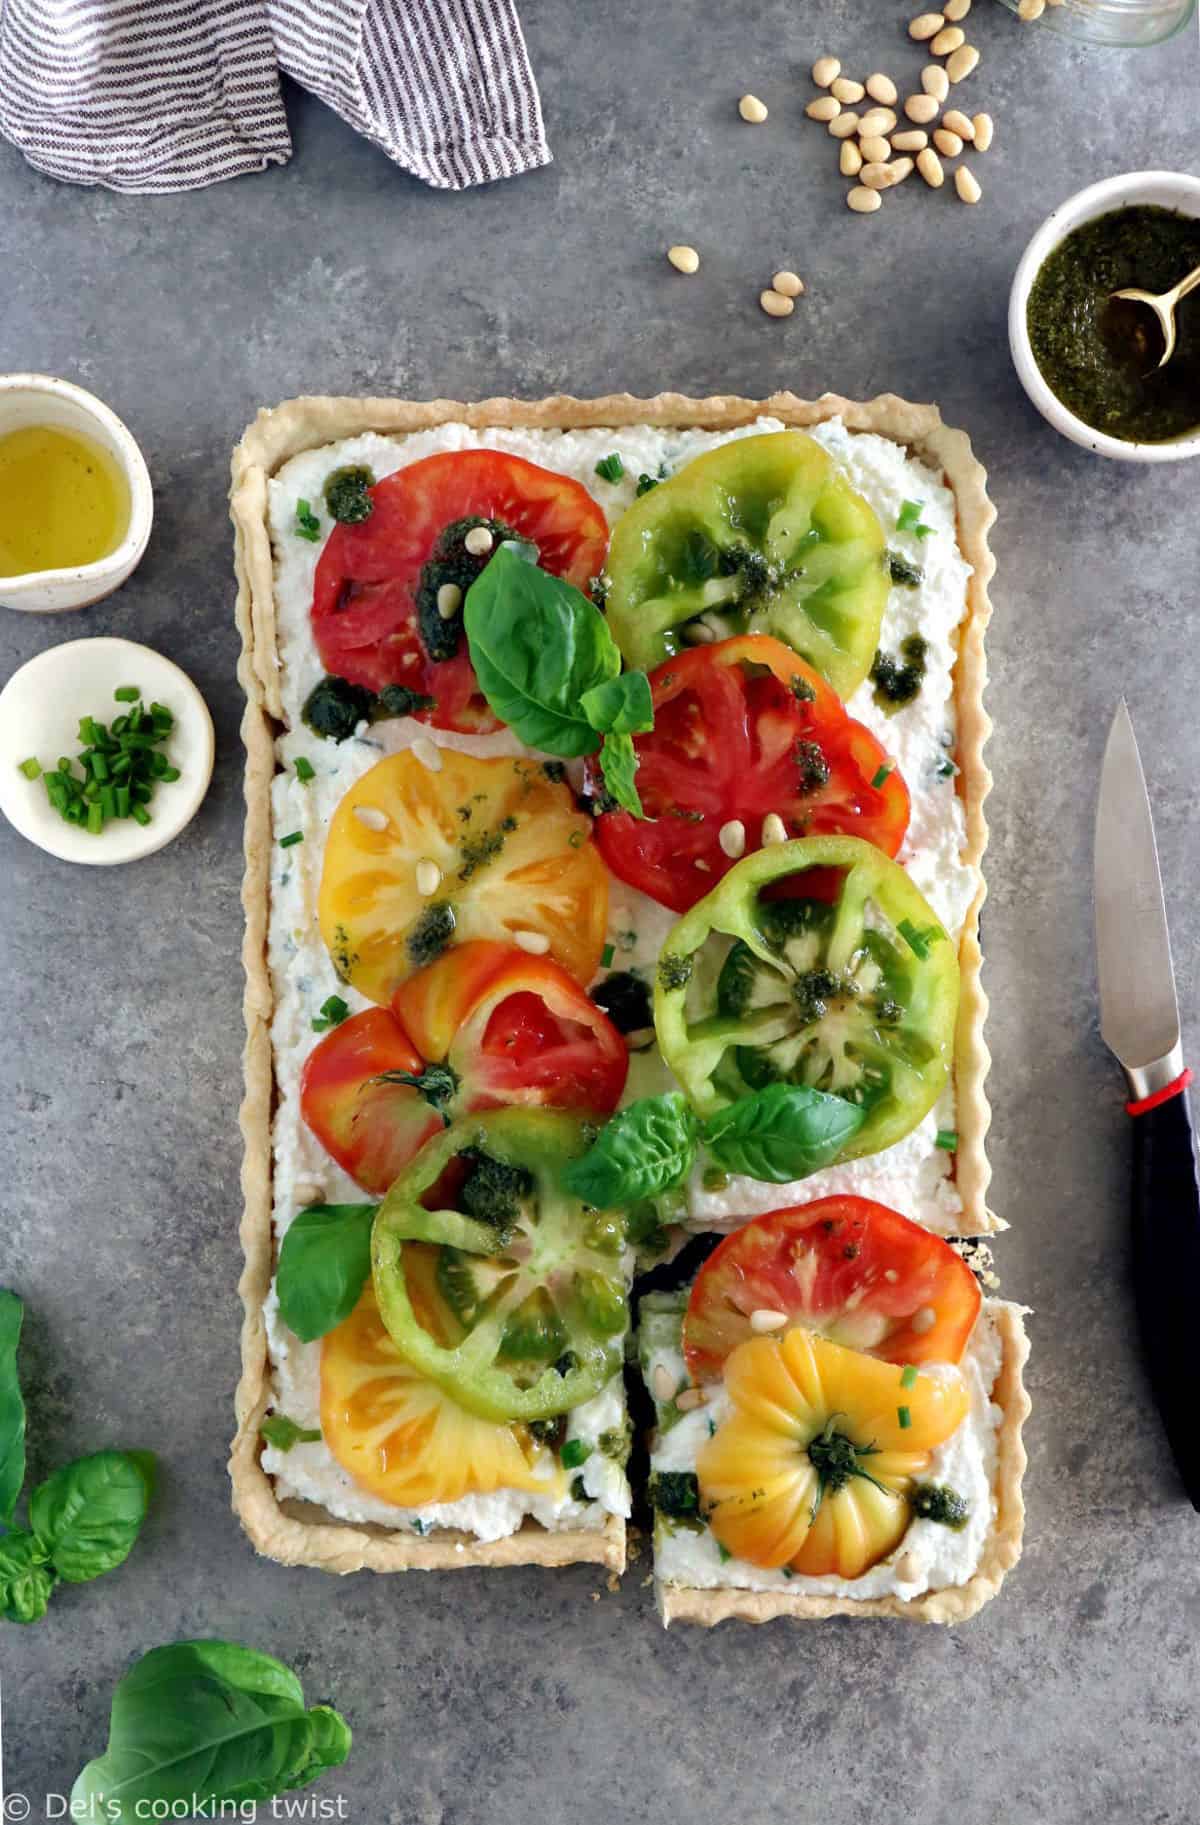 Simple and packed with refreshing flavors, this fresh herb tomato cheesecake tart will soon become a summer favorite.